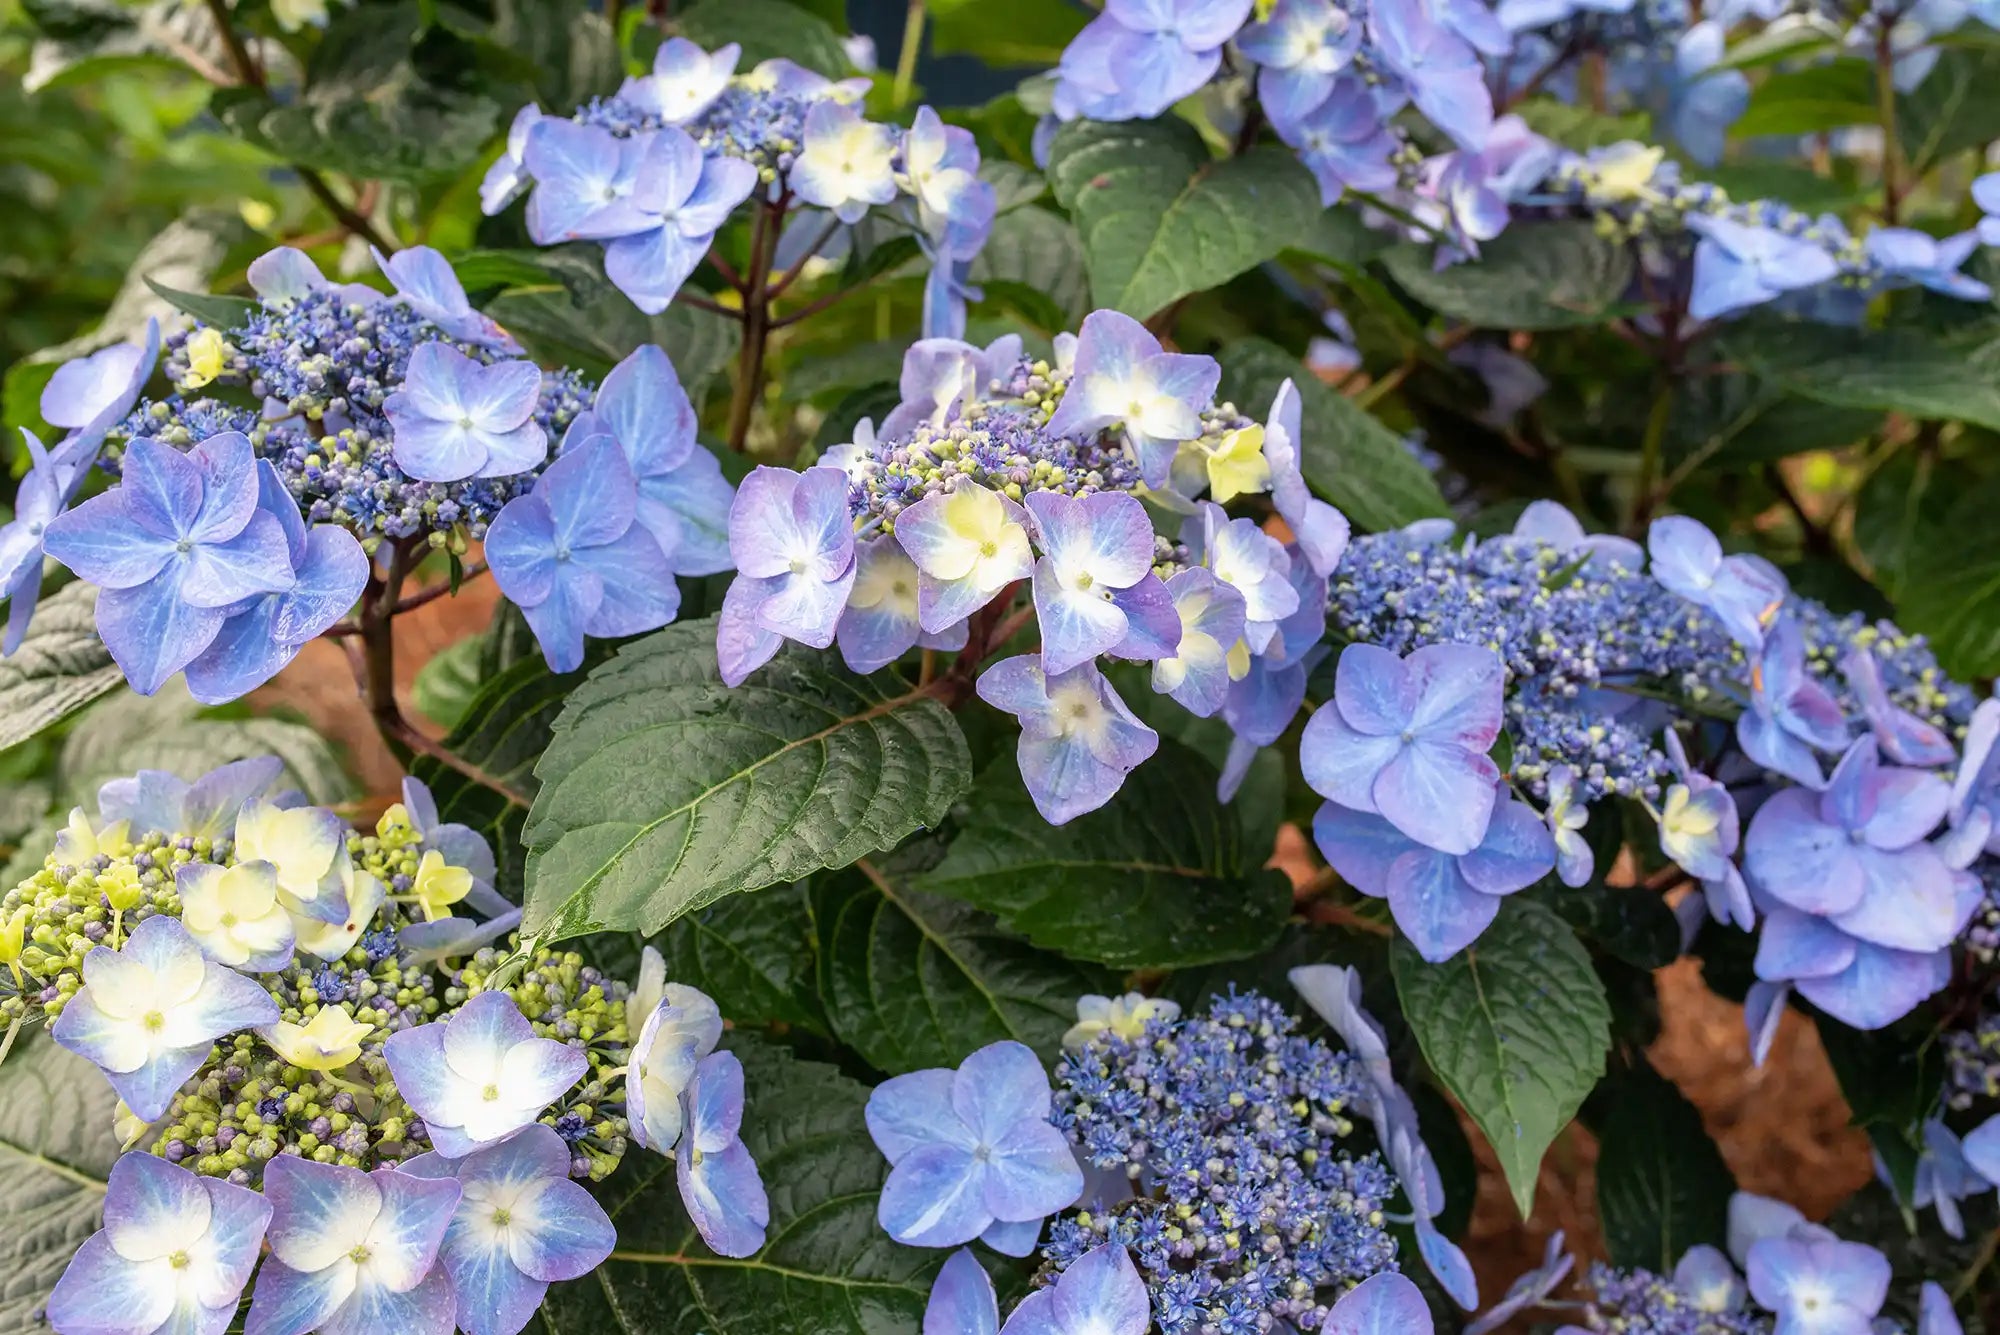 Endless Summer® hydrangea is the Pop Star® in this garden with its blue blooms and dark green leaves. These blossoms will make way for hydrangea buds that are ready to bloom.